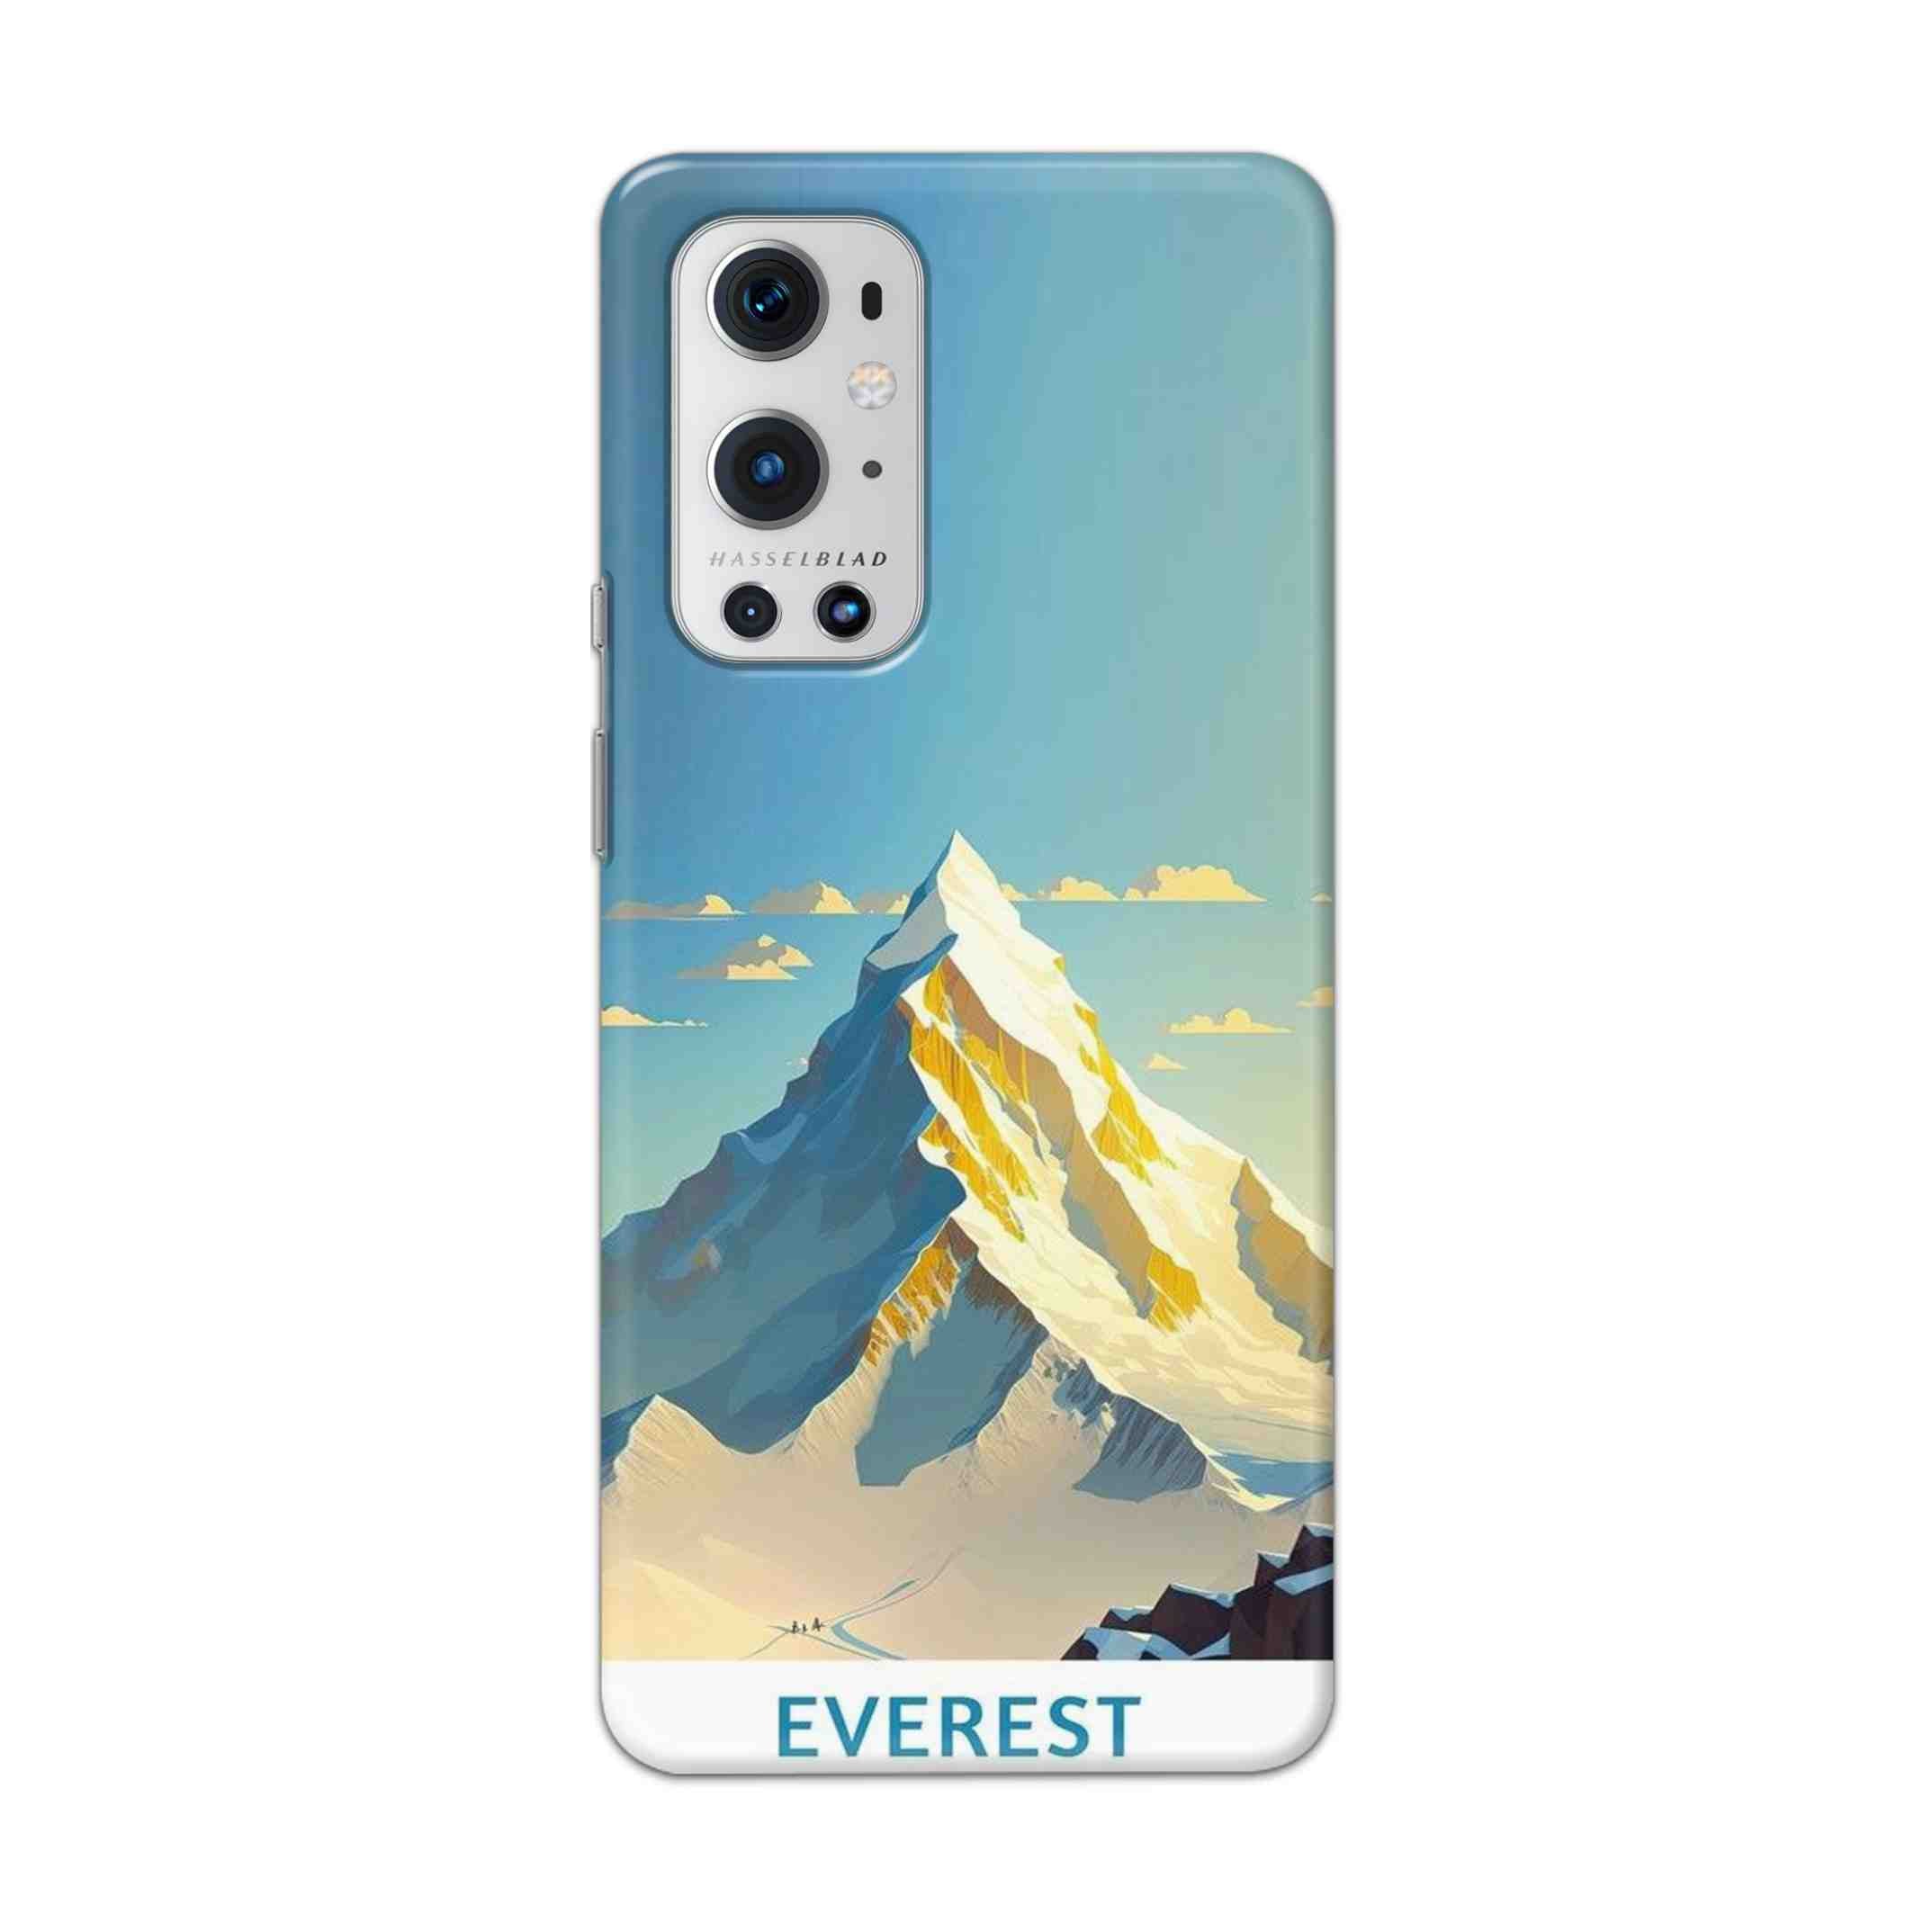 Buy Everest Hard Back Mobile Phone Case Cover For OnePlus 9 Pro Online